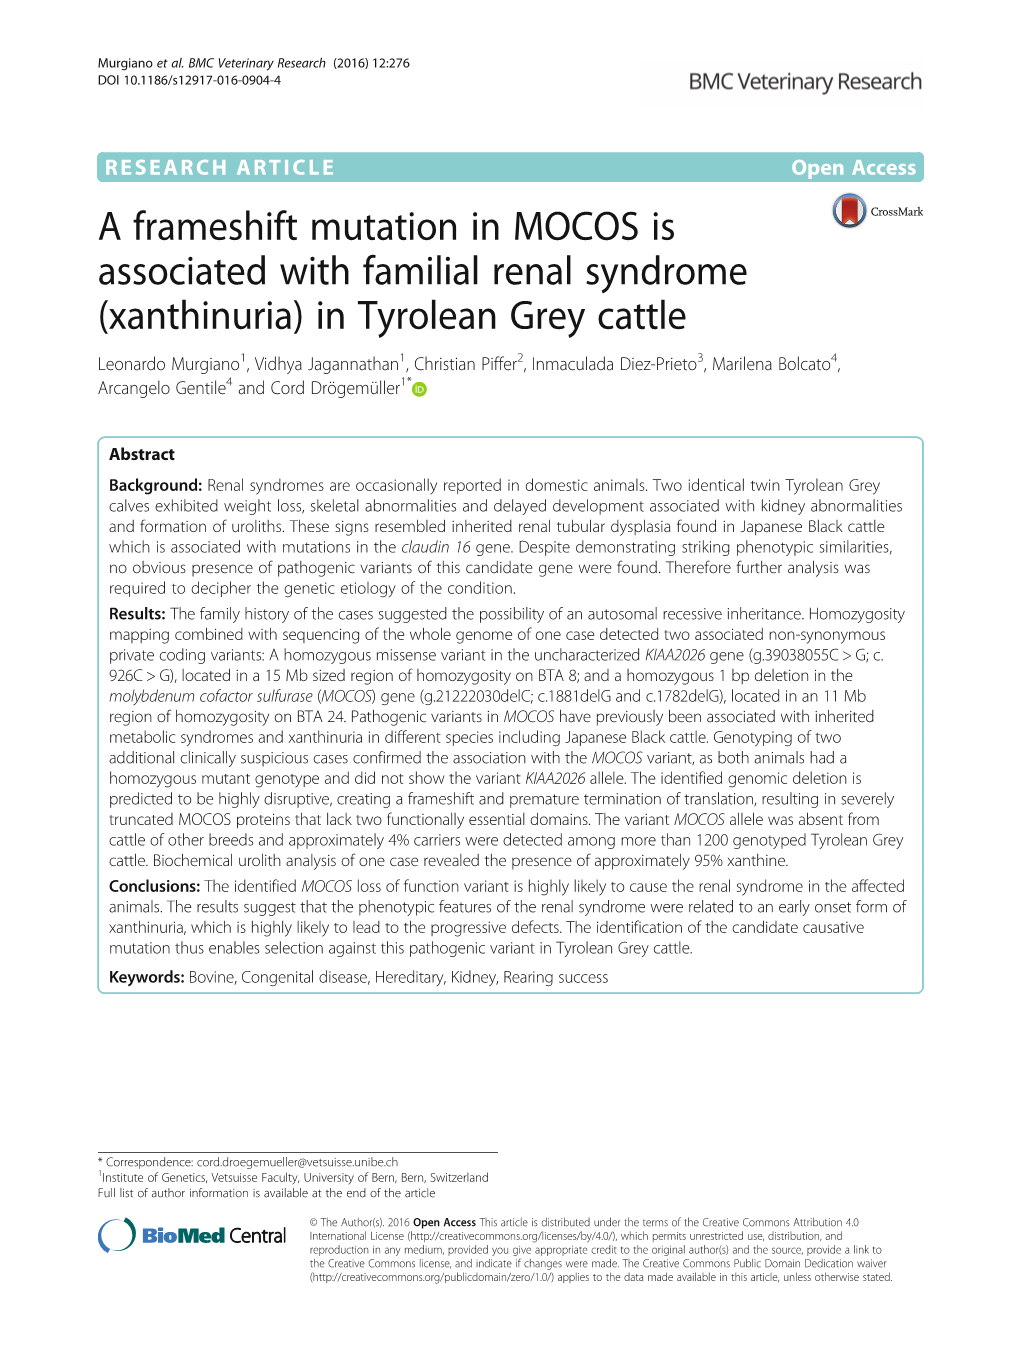 A Frameshift Mutation in MOCOS Is Associated with Familial Renal Syndrome (Xanthinuria) in Tyrolean Grey Cattle